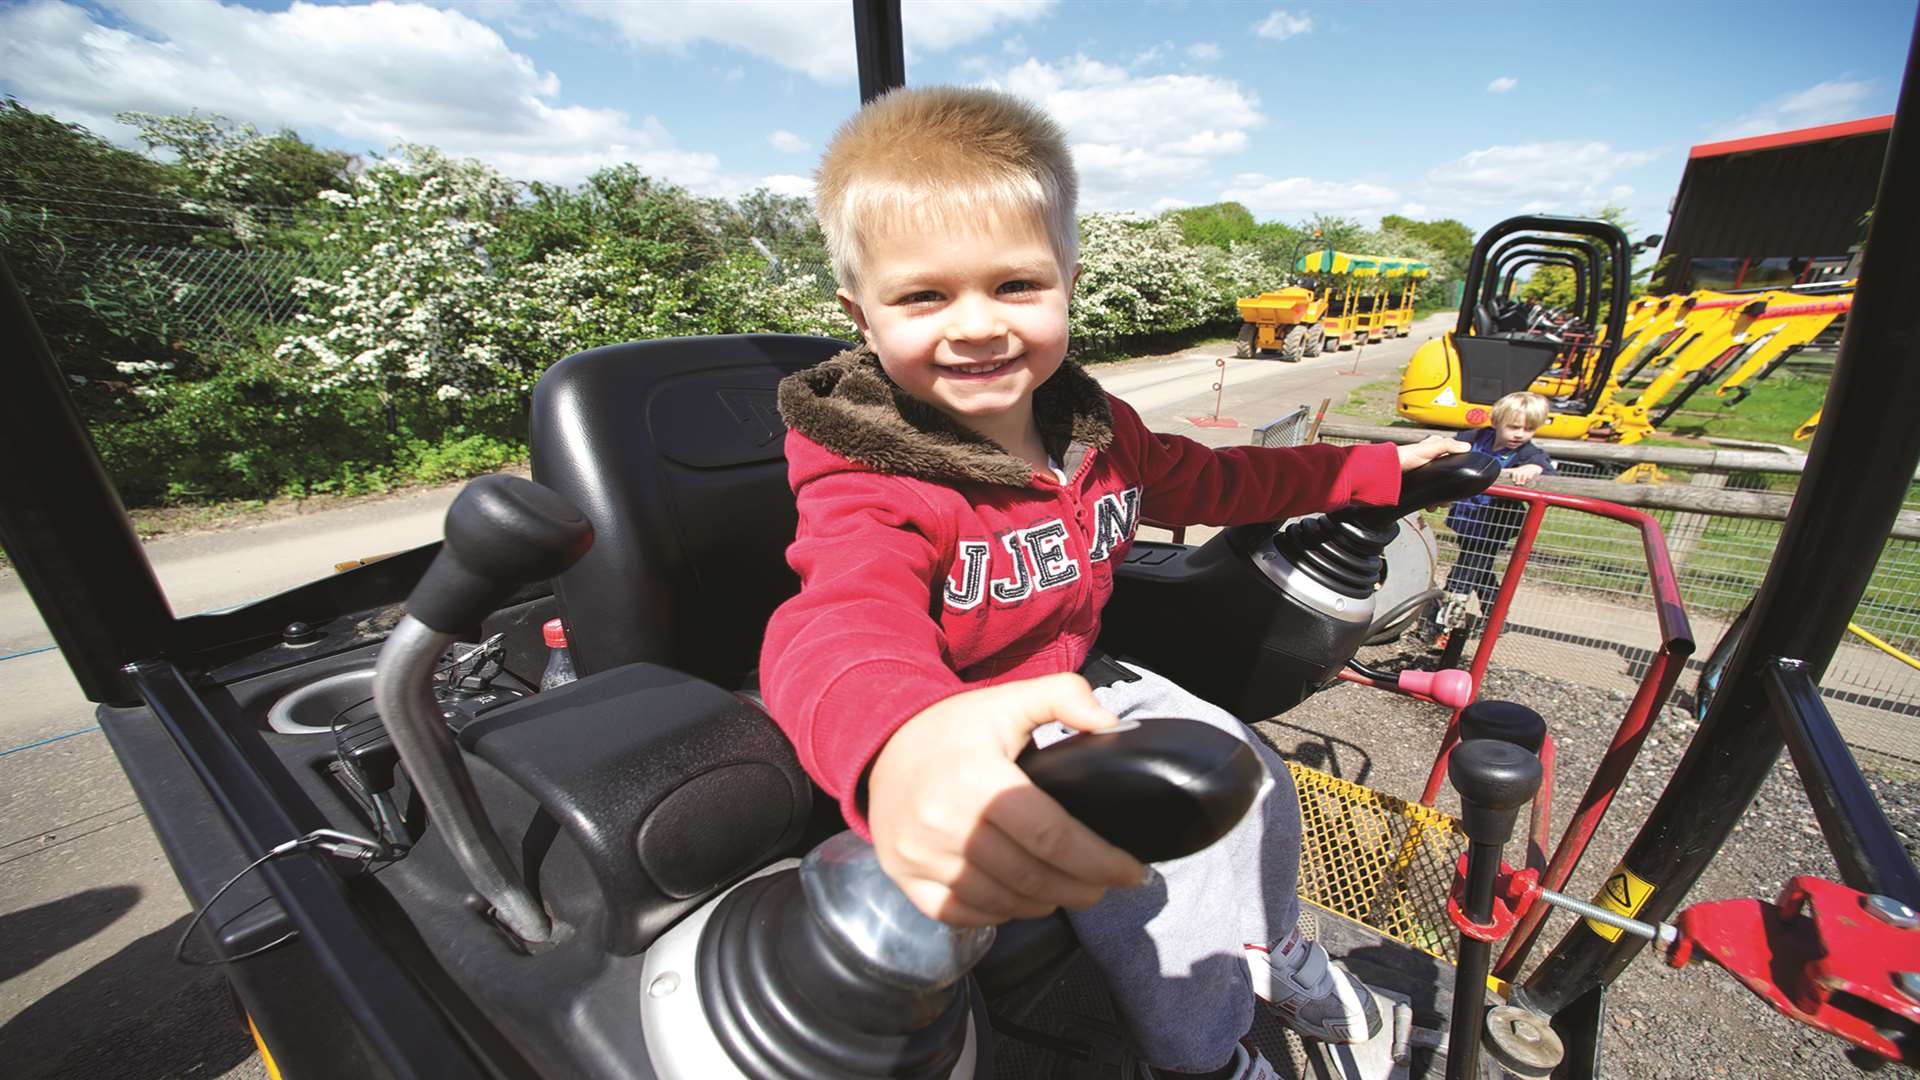 Head to Diggerland for summer fun